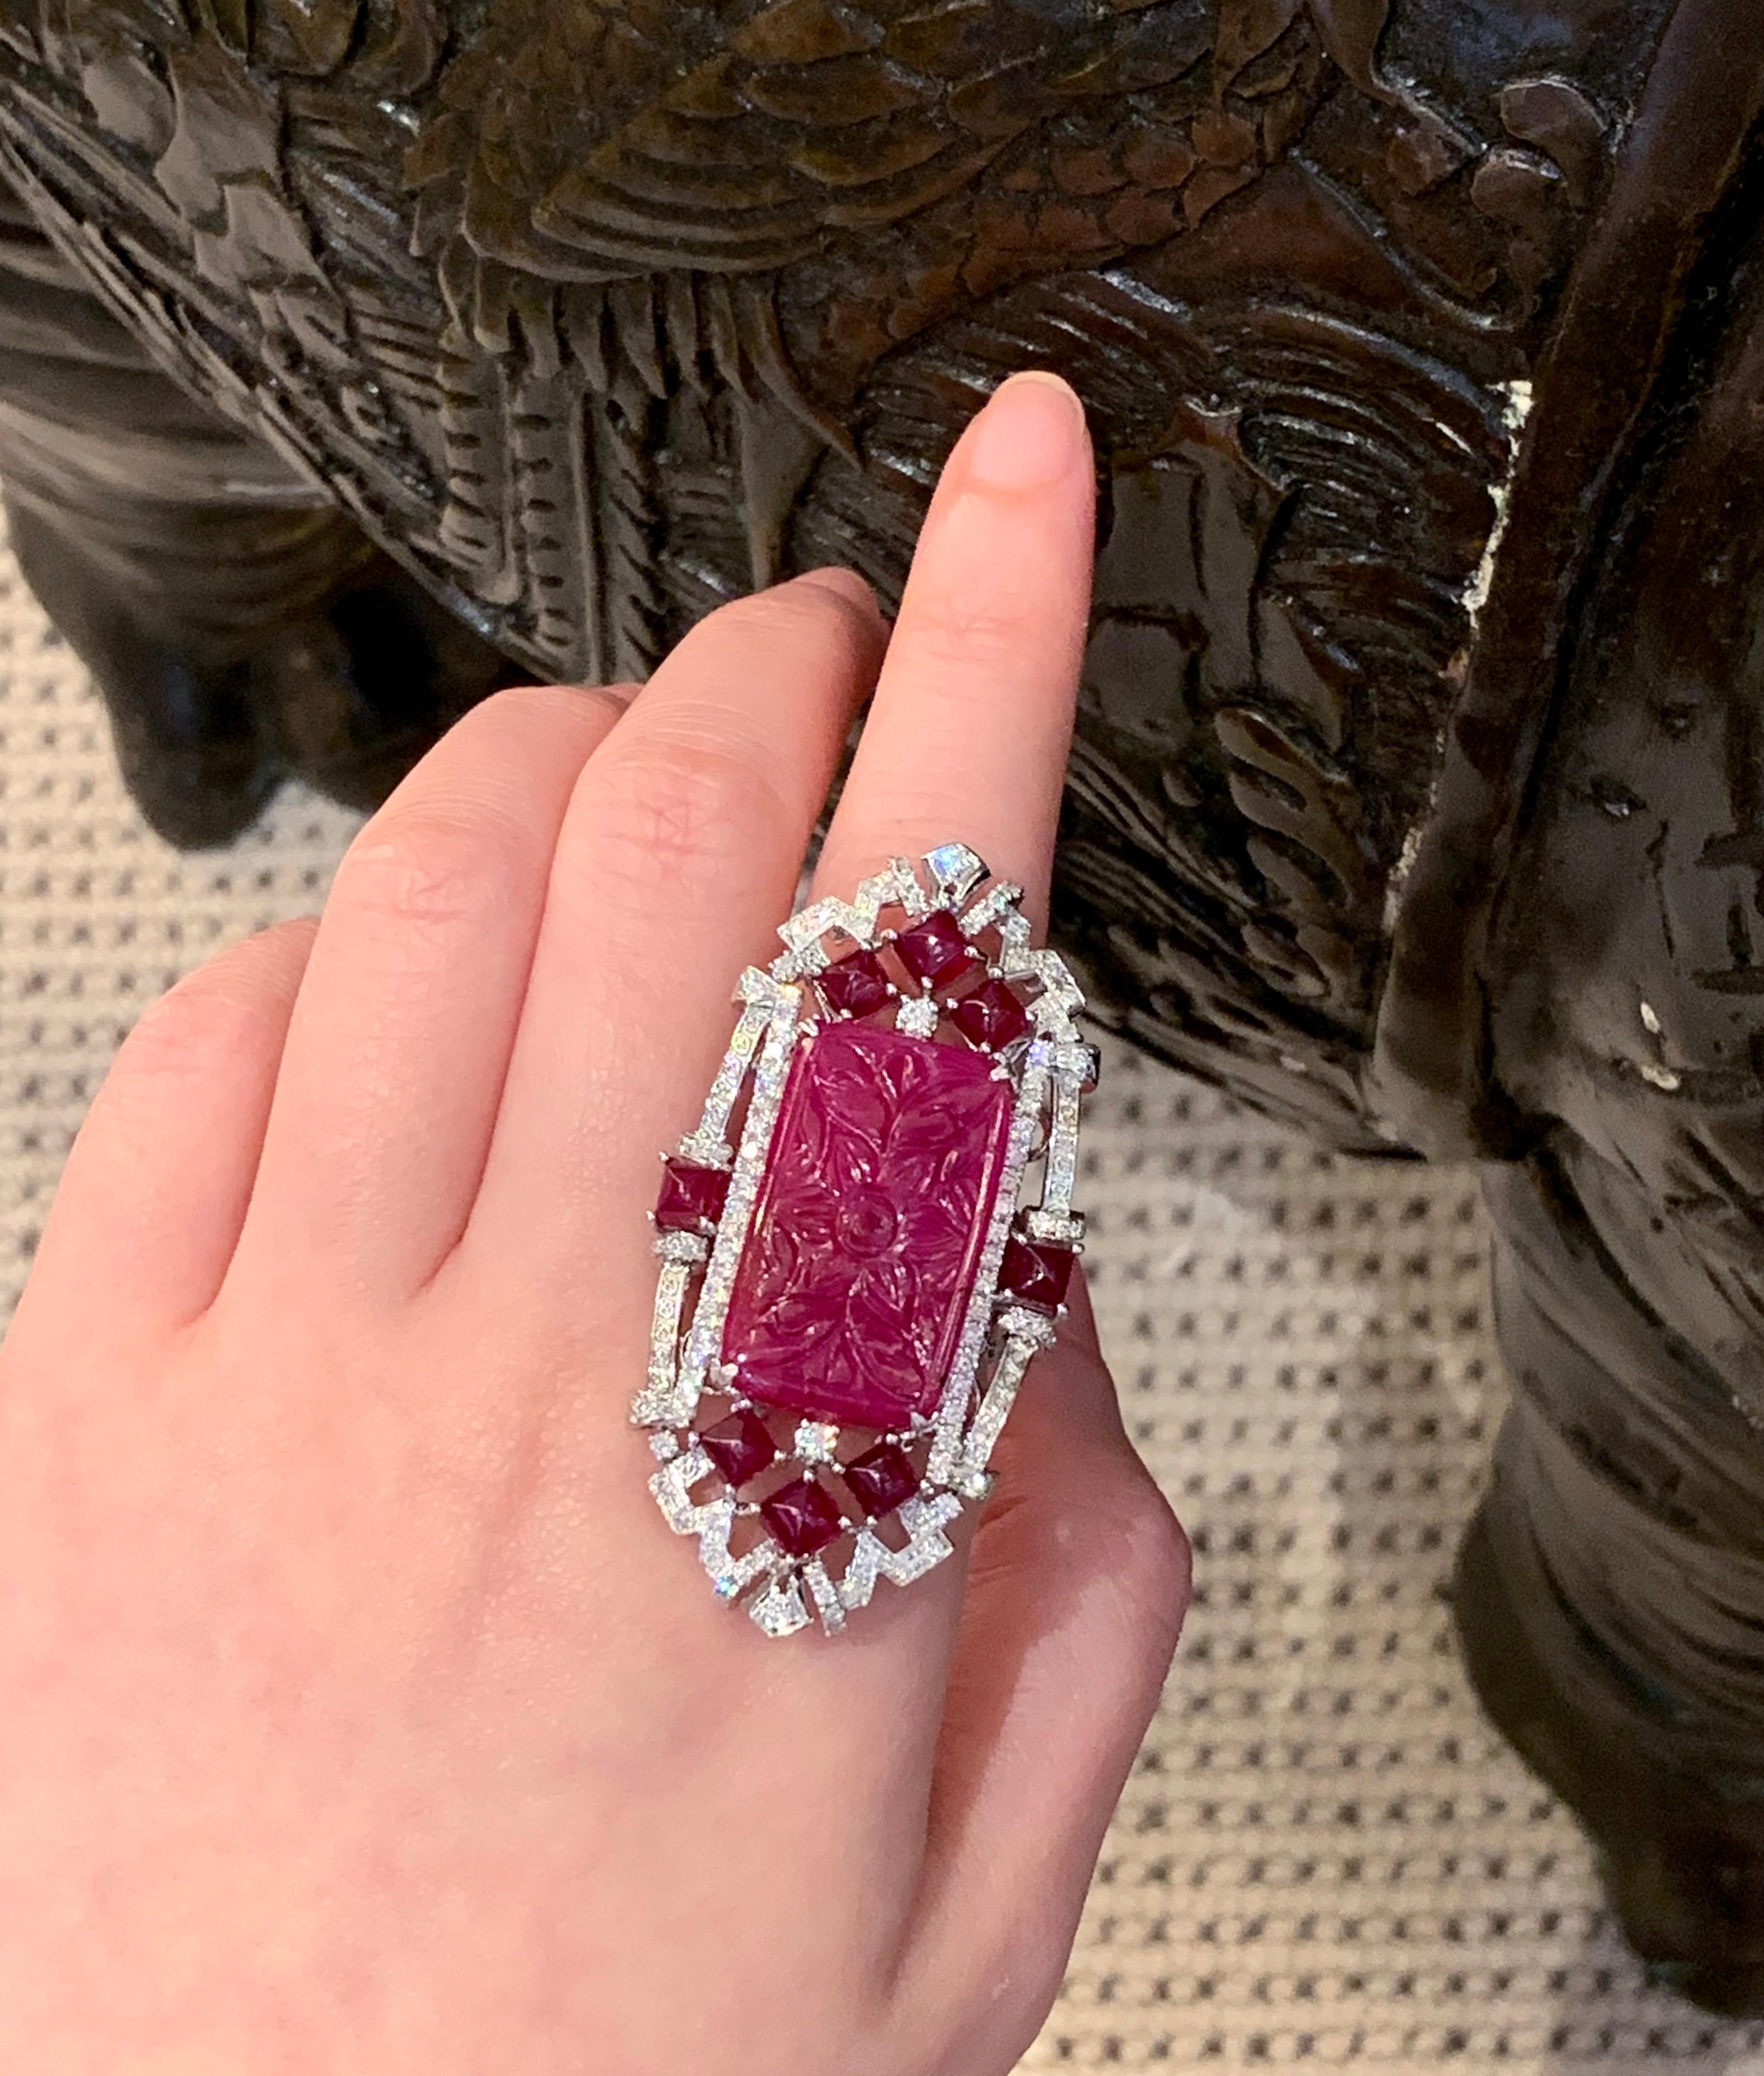 Dilys’ brings back the drama to wearable fine jewelry with another Art Deco inspired creation, featuring the one-of-a-kind GRS-certified 16.43-carat carved ruby centrestone. This piece is designed by Dilys’ to be worn as both a statement-making ring